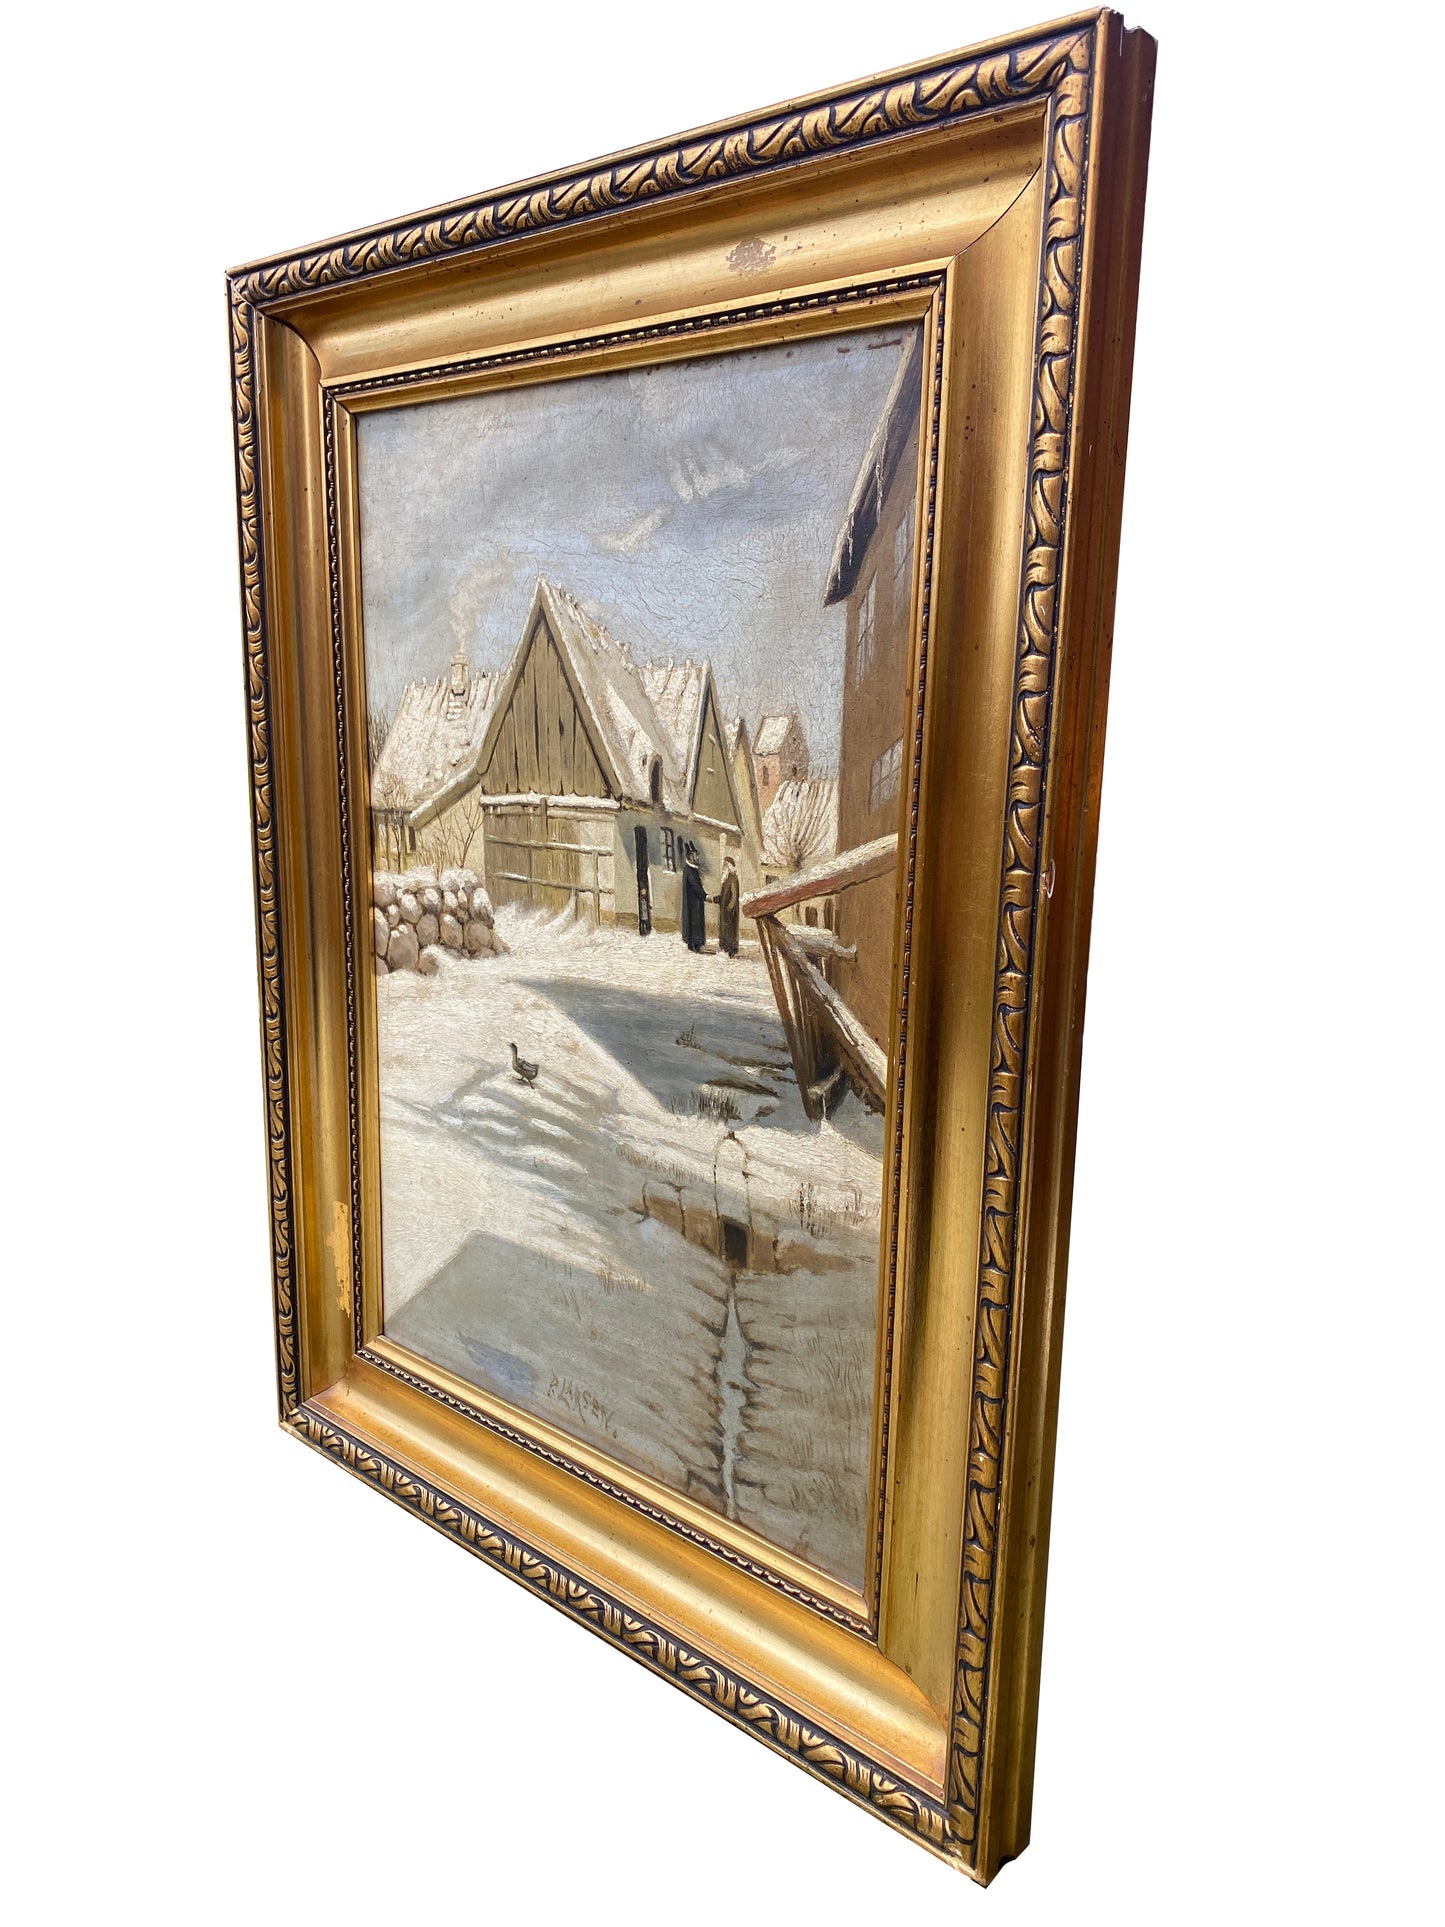 Framed Oil on Canvas 'Figures Greeting in the Distance' c1950 SIgned P Larsen